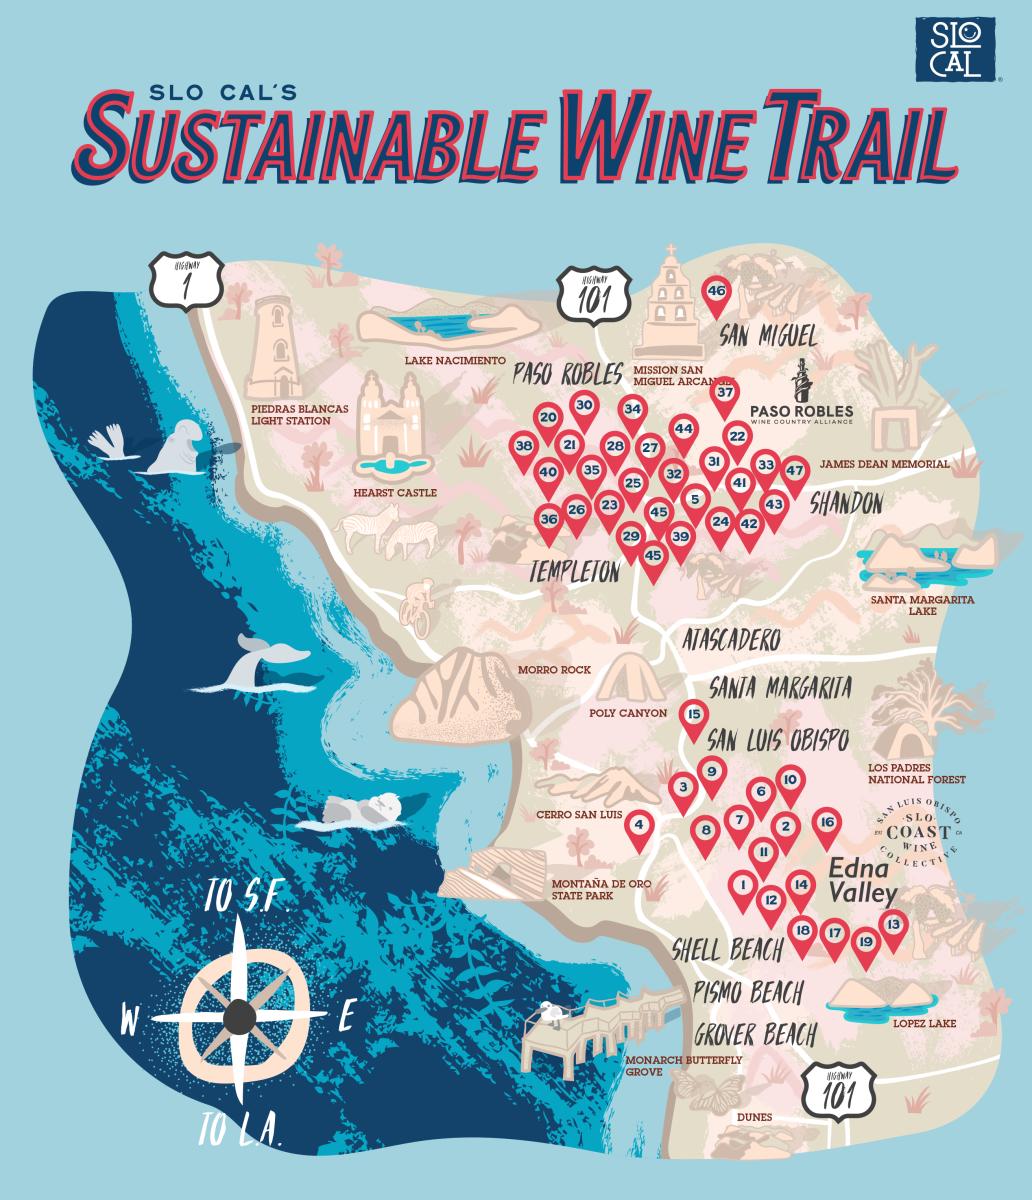 SLO CAL Sustainable Wine Trail